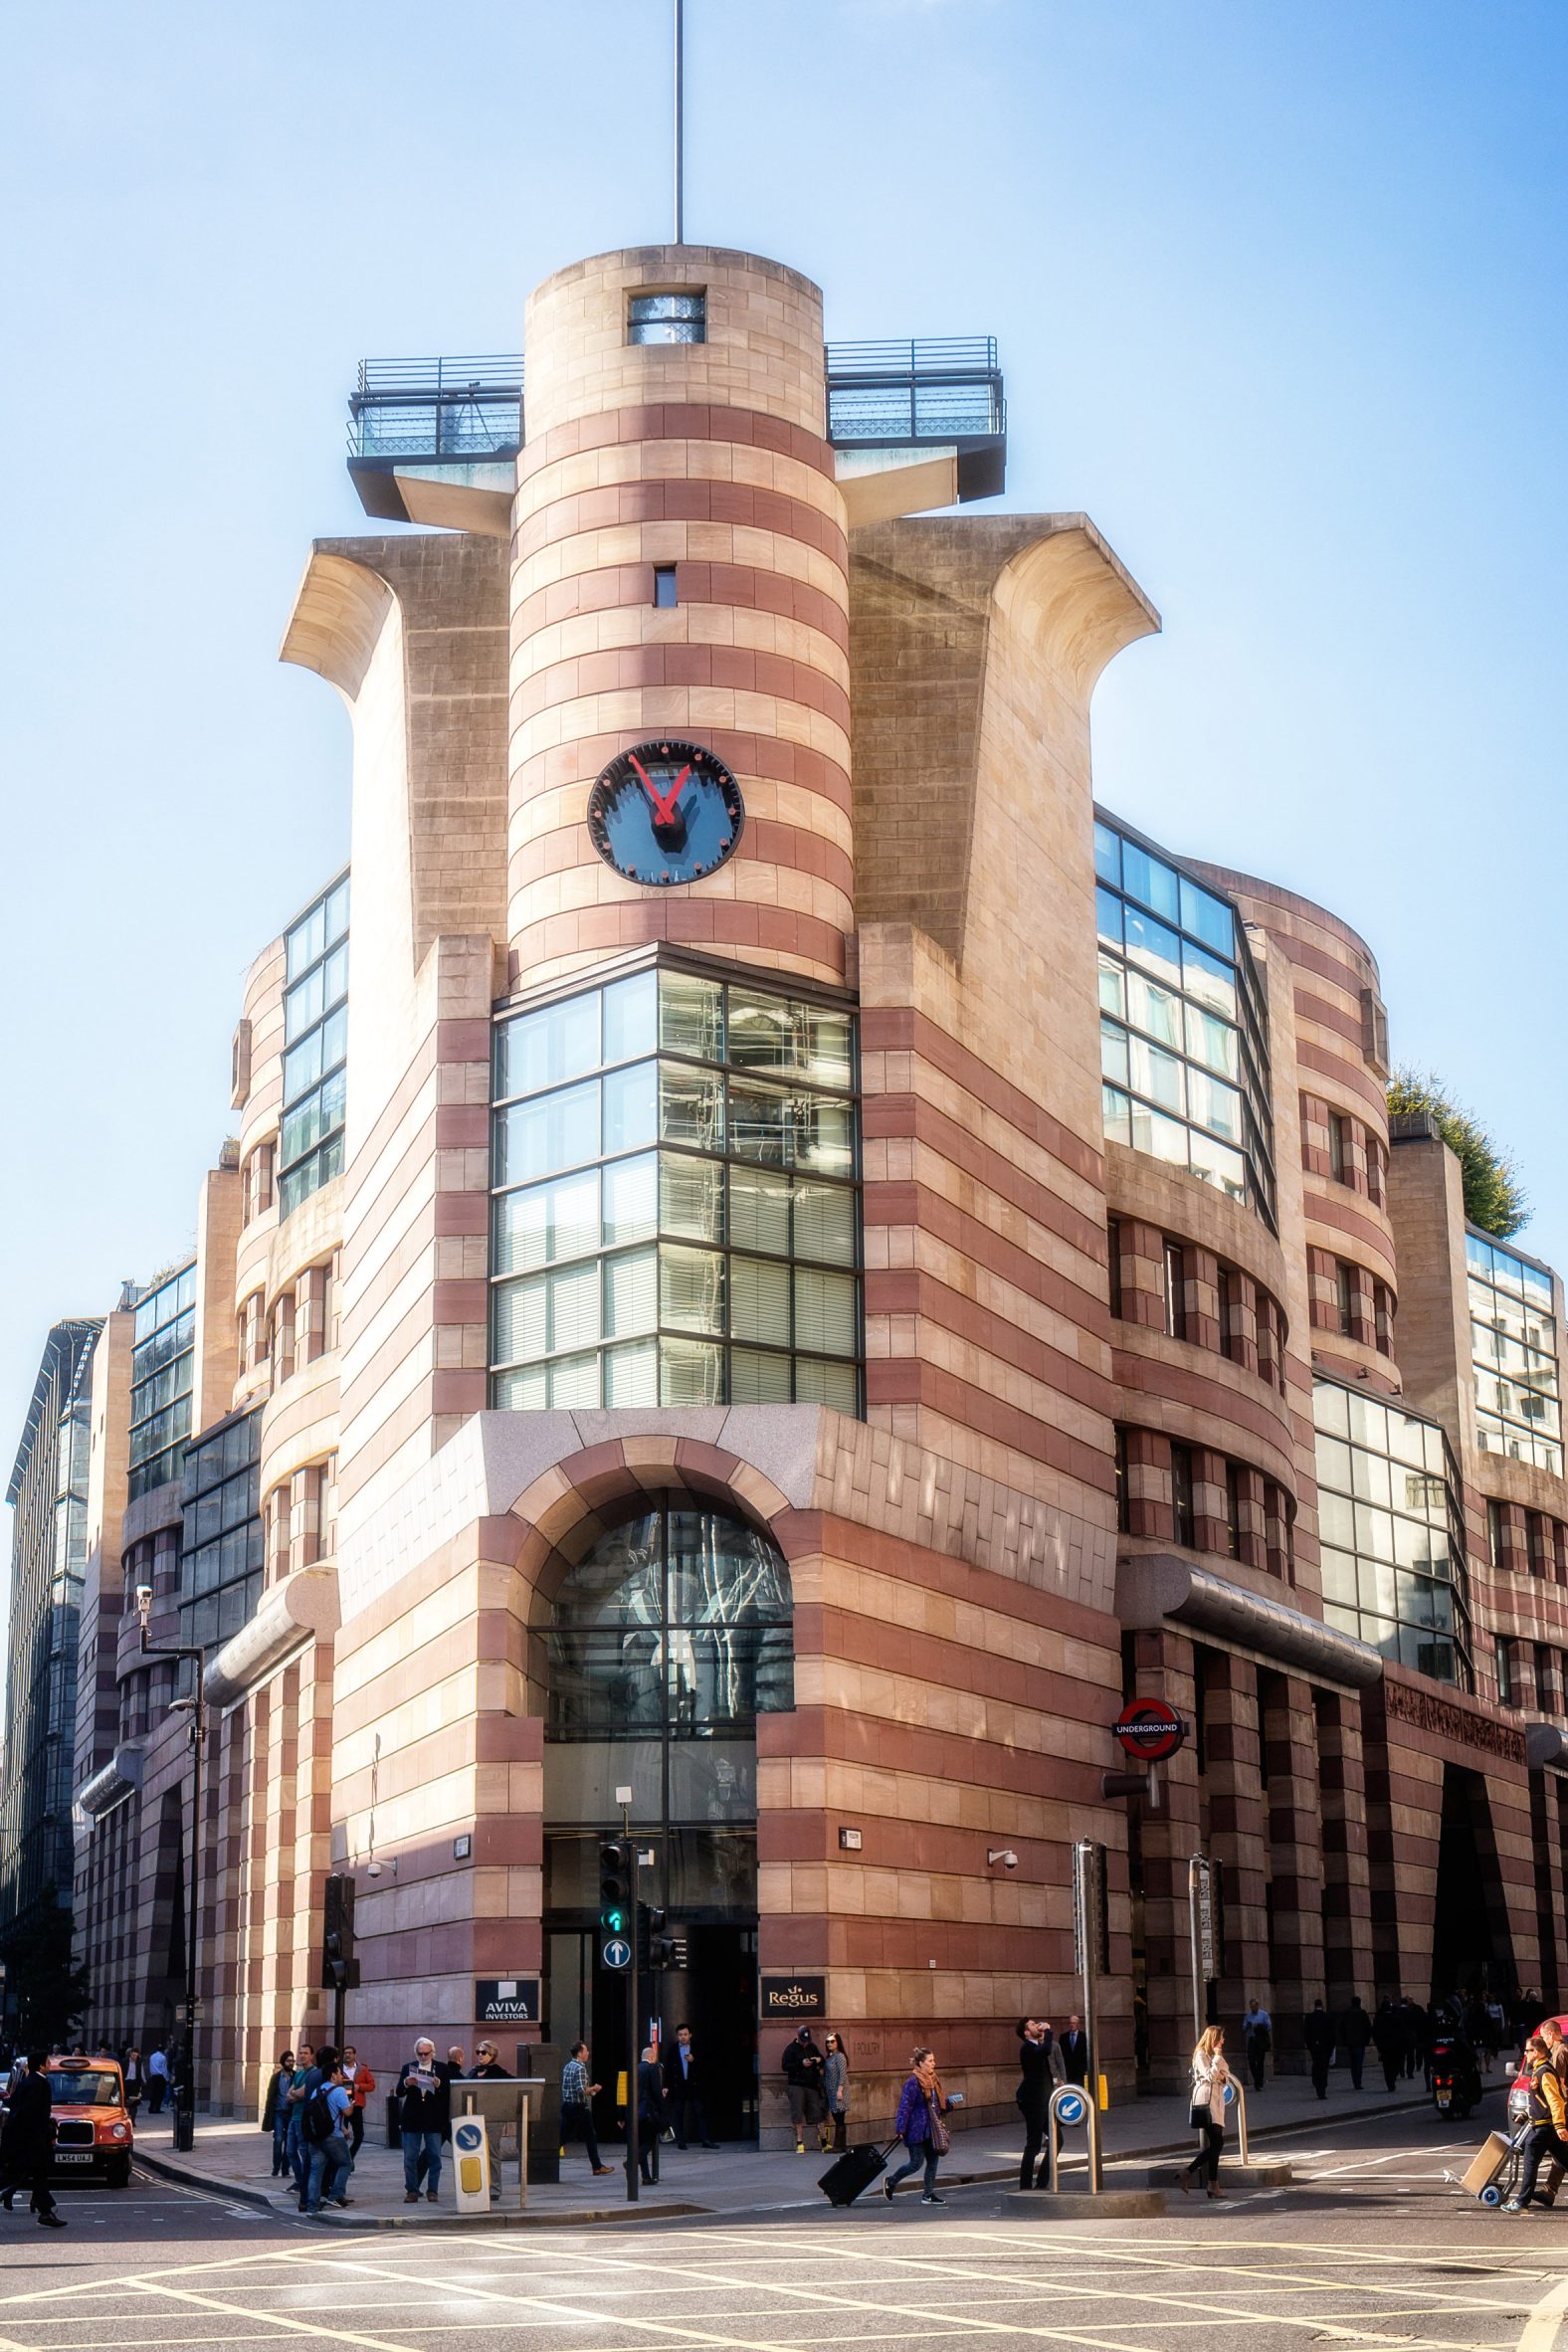 Exterior of No 1 Poultry in London